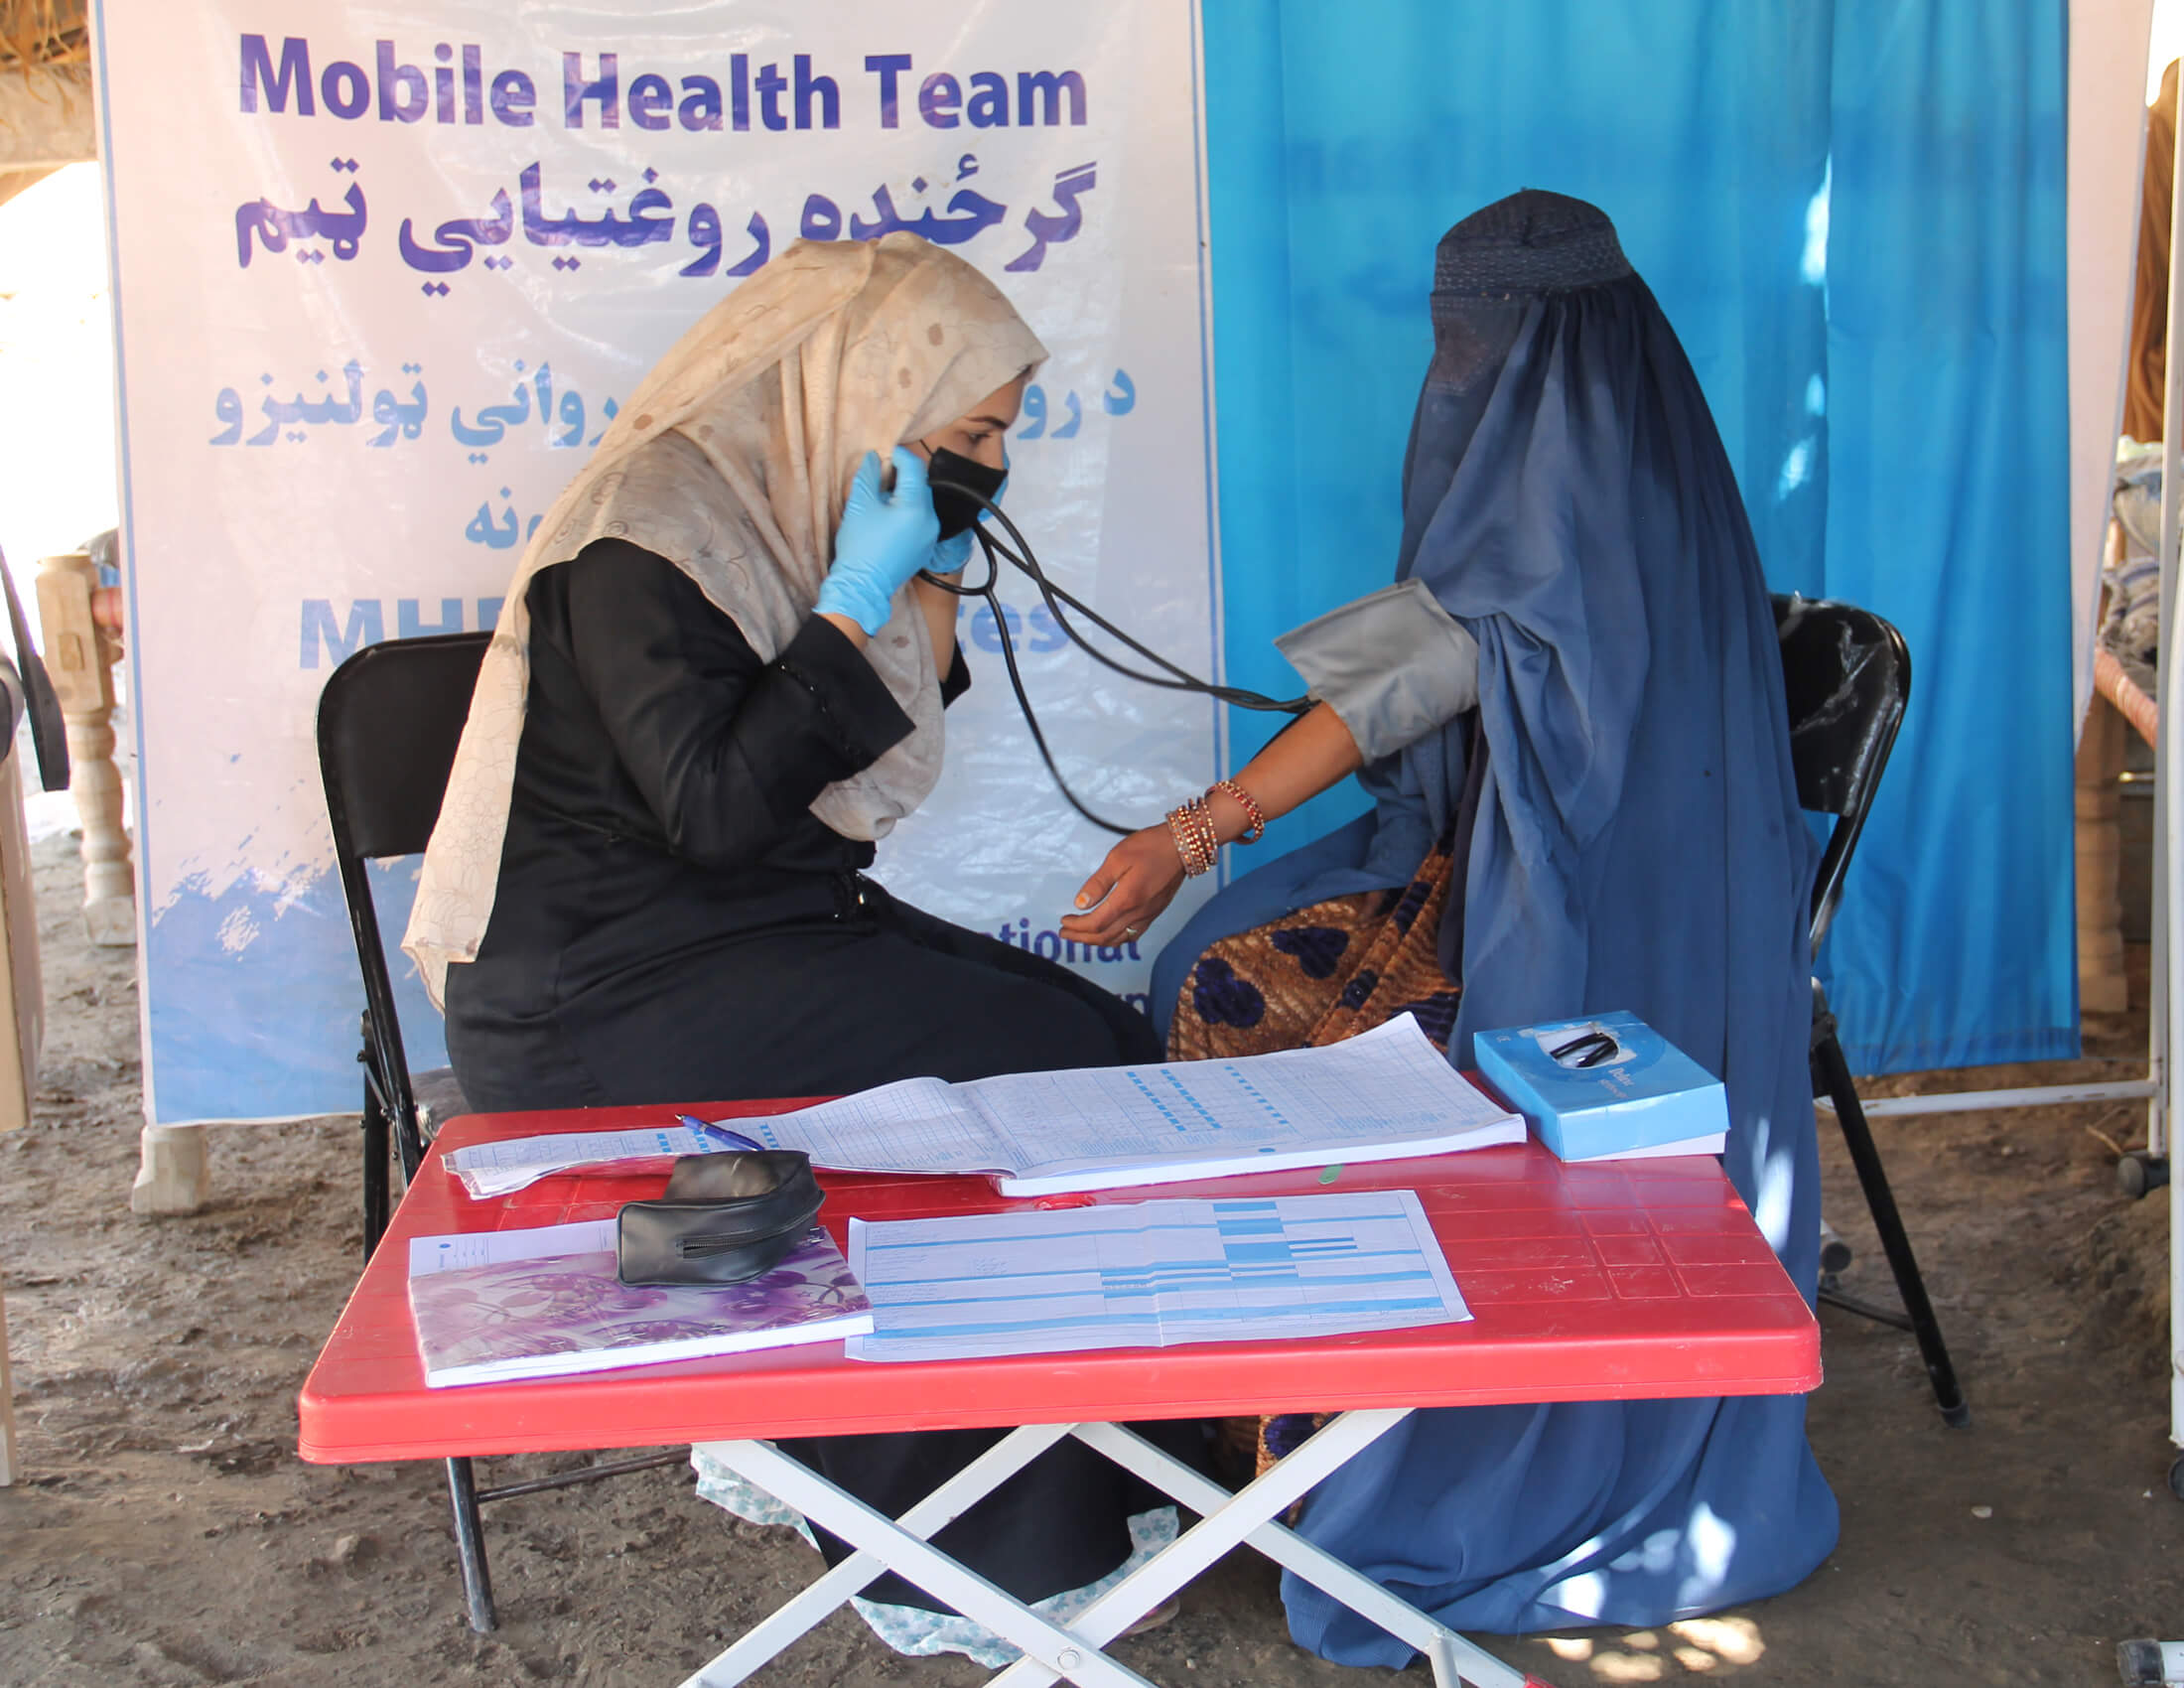 Mursal is part of a mobile health team in Afghanistan that provides a range of health services.